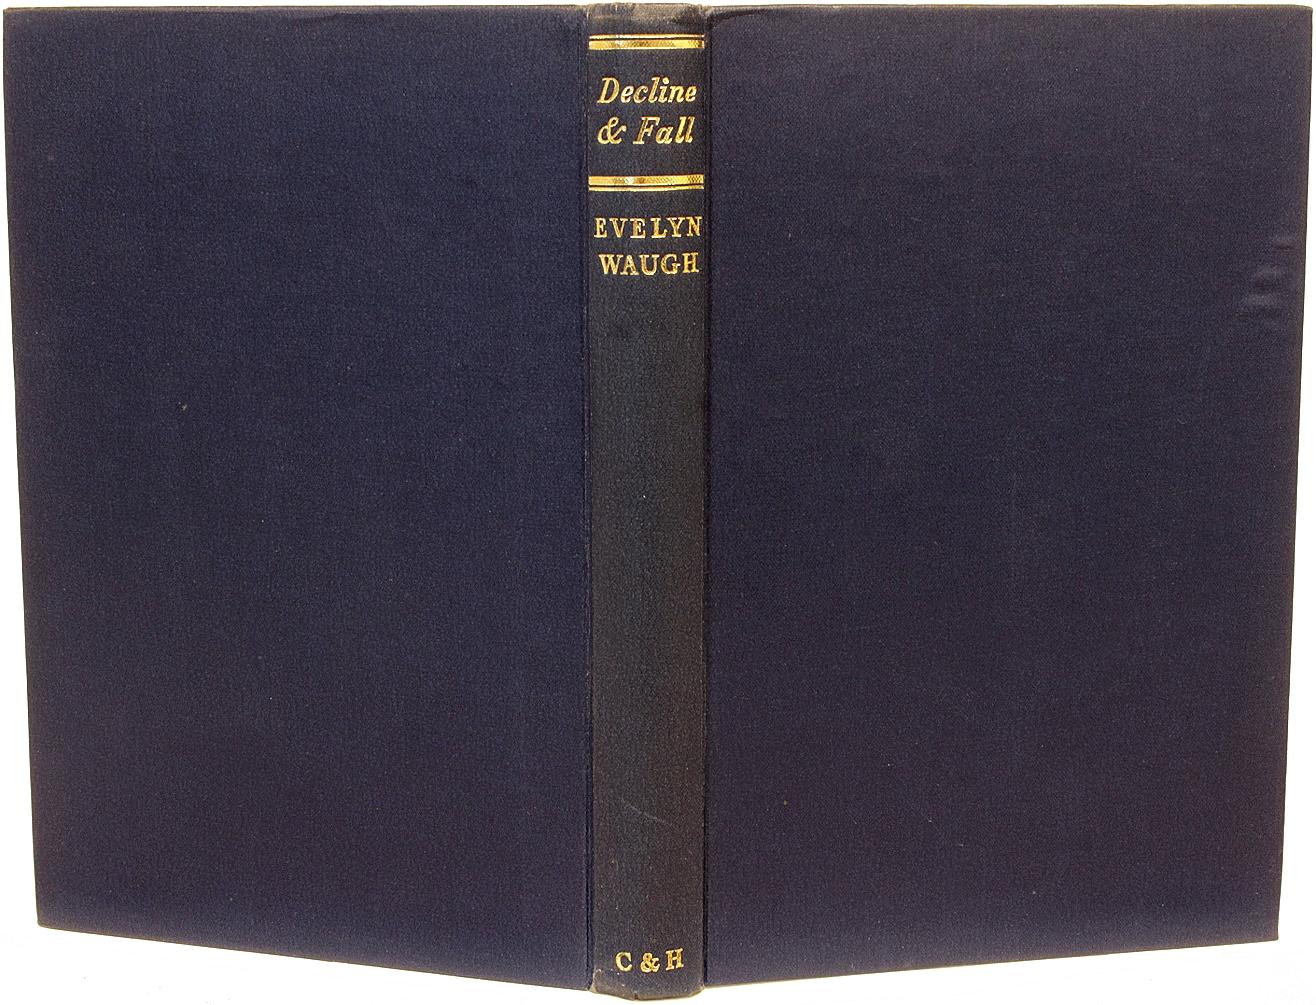 British Waugh, Evelyn, Decline & Fall, 1962-Revised Edition-Presentation Copy ! For Sale